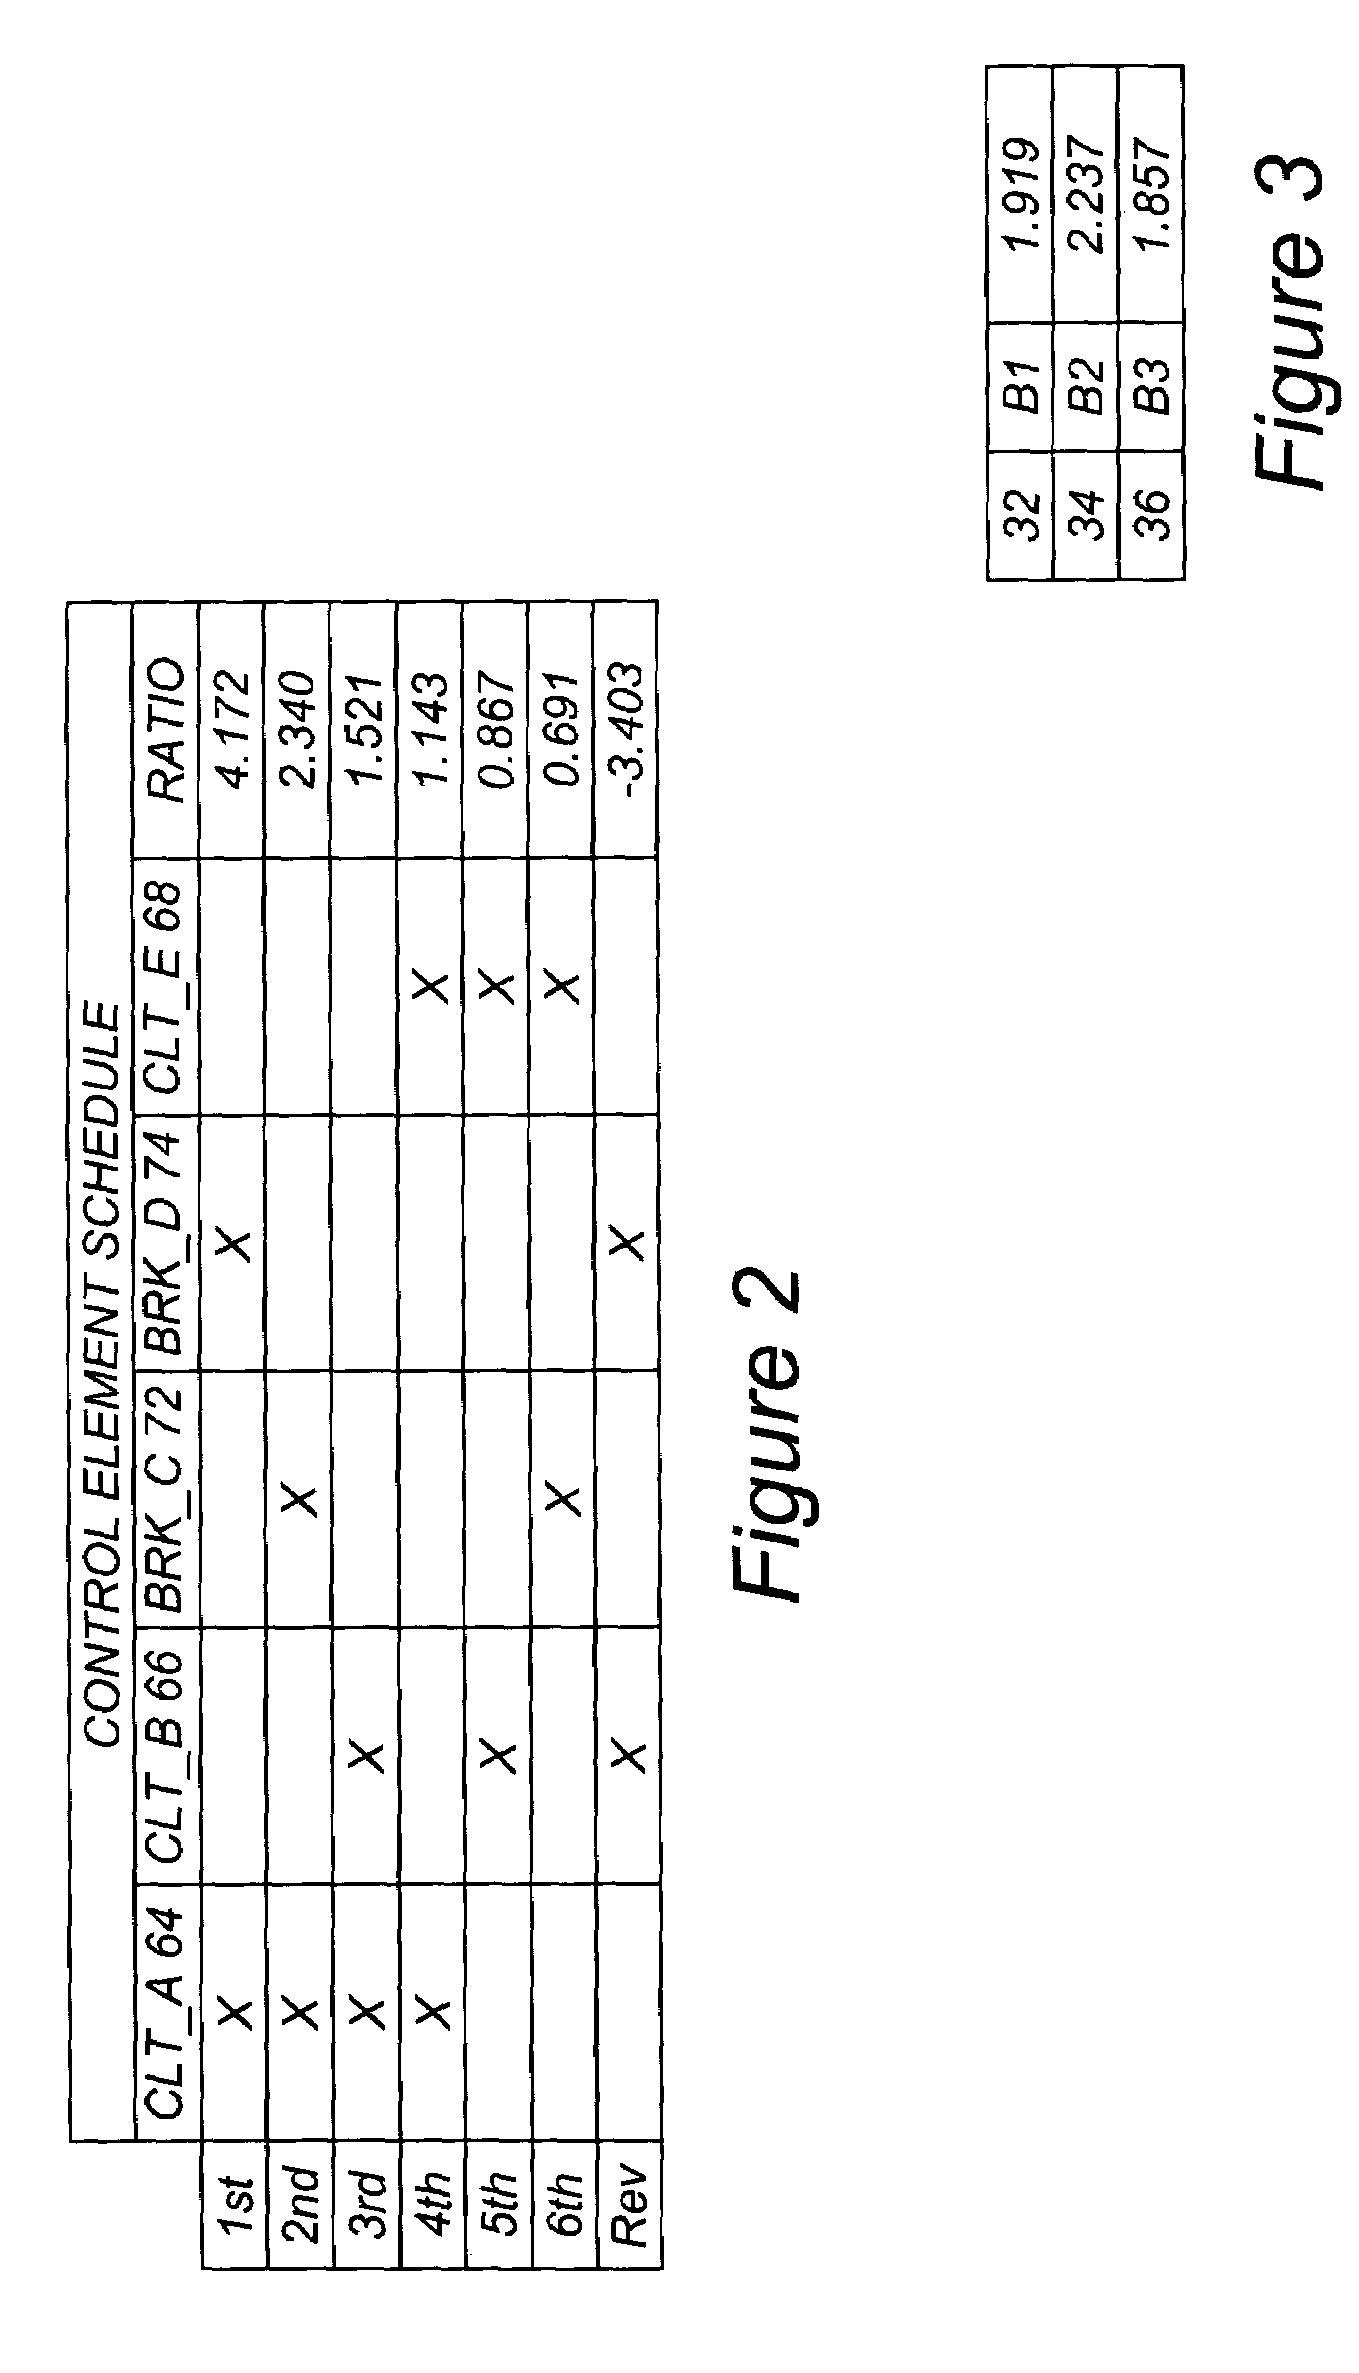 Multiple-speed automatic transmission having a two-speed input and a Simpson gearset